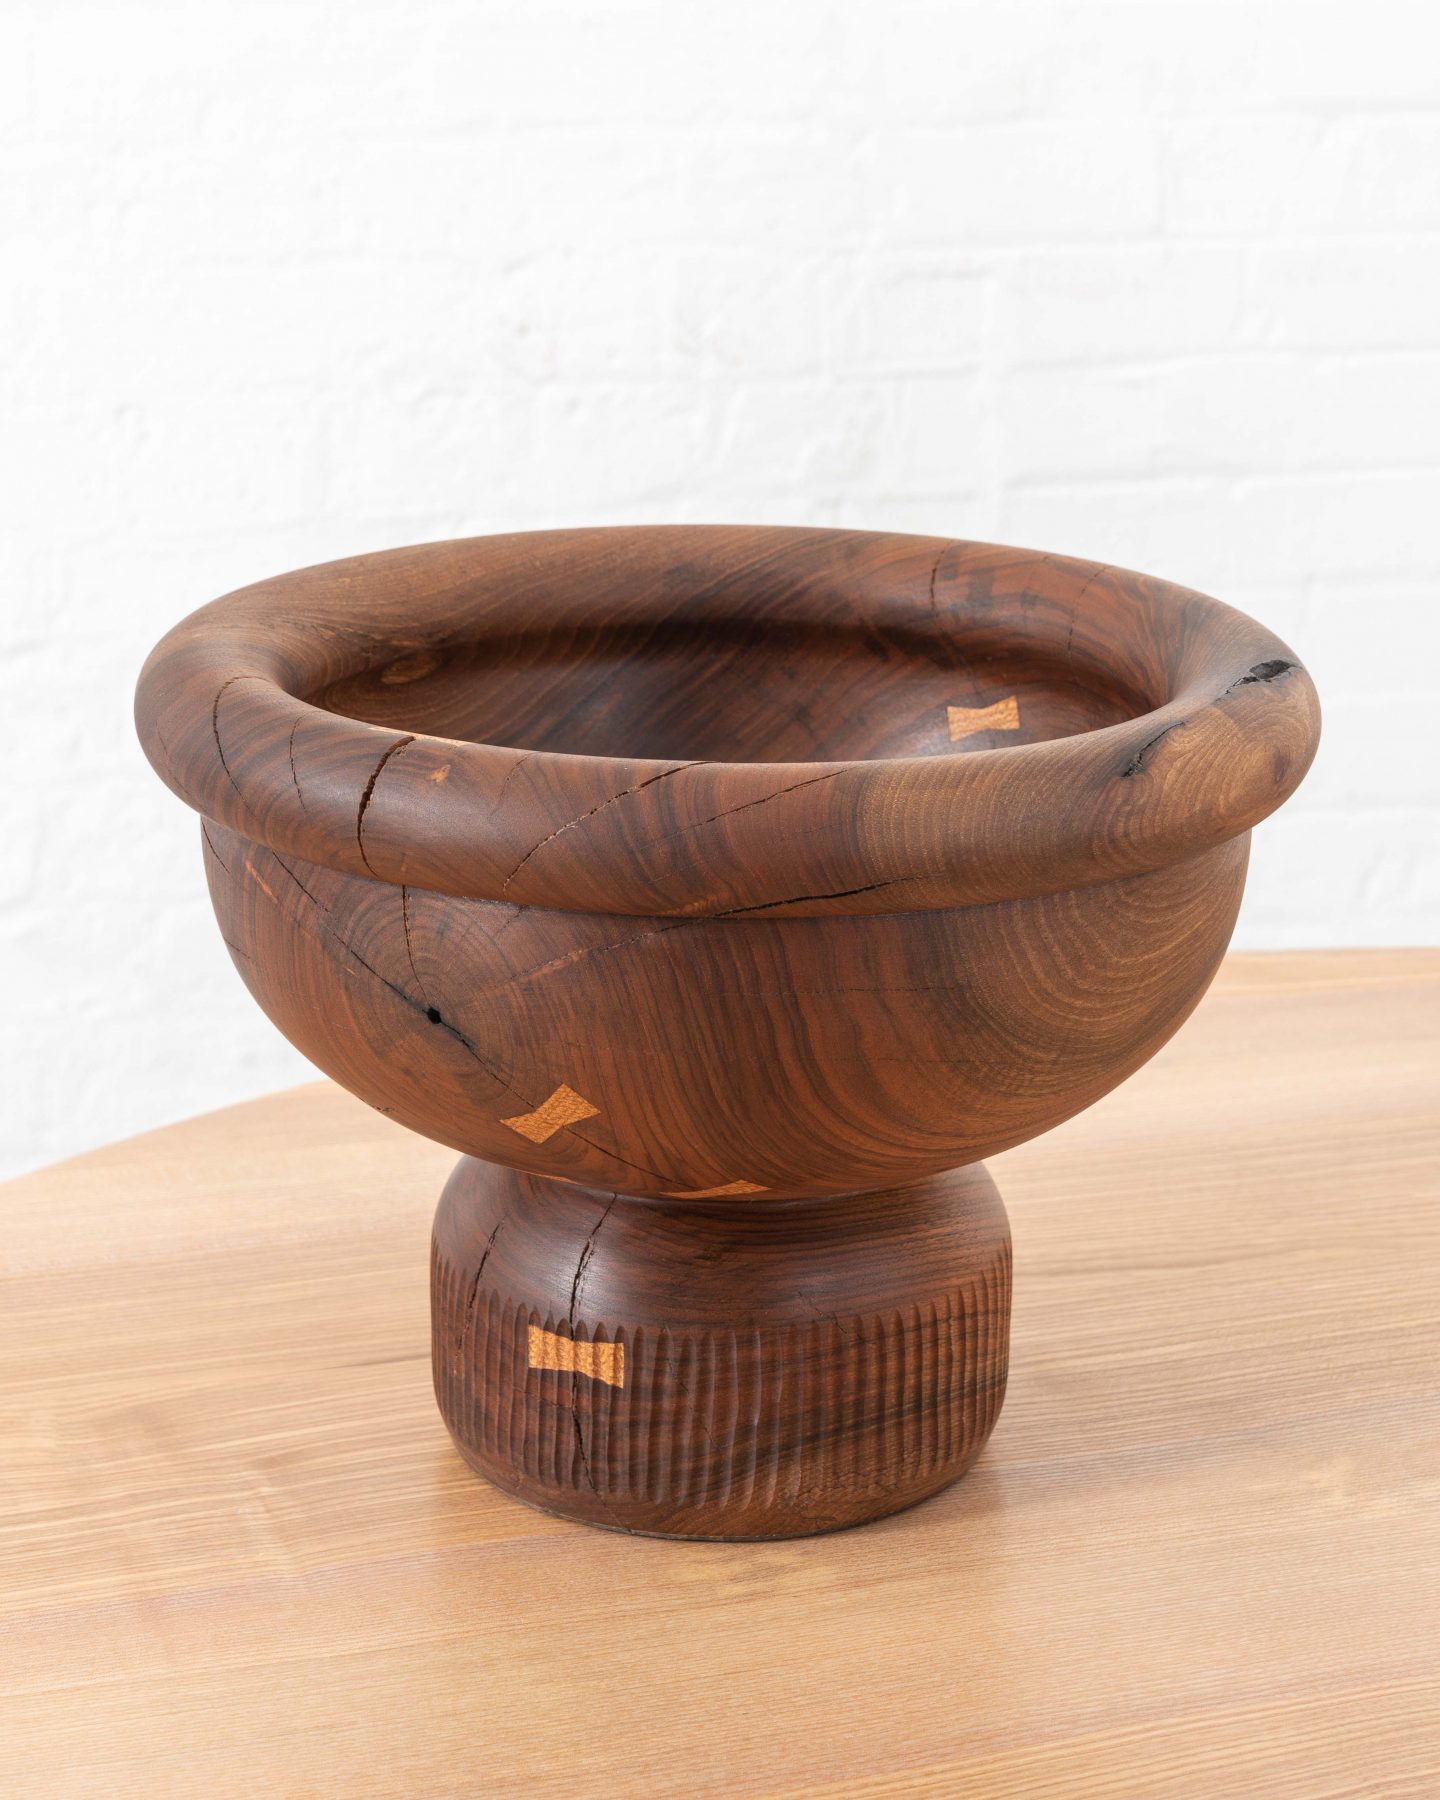 One Legger, Turned and hand carved vessel from a single piece of English walnut. rare timber comes from Dog kennel hill, Camberwell, London. Elm dovetail keys have been utilised to tie the object together.